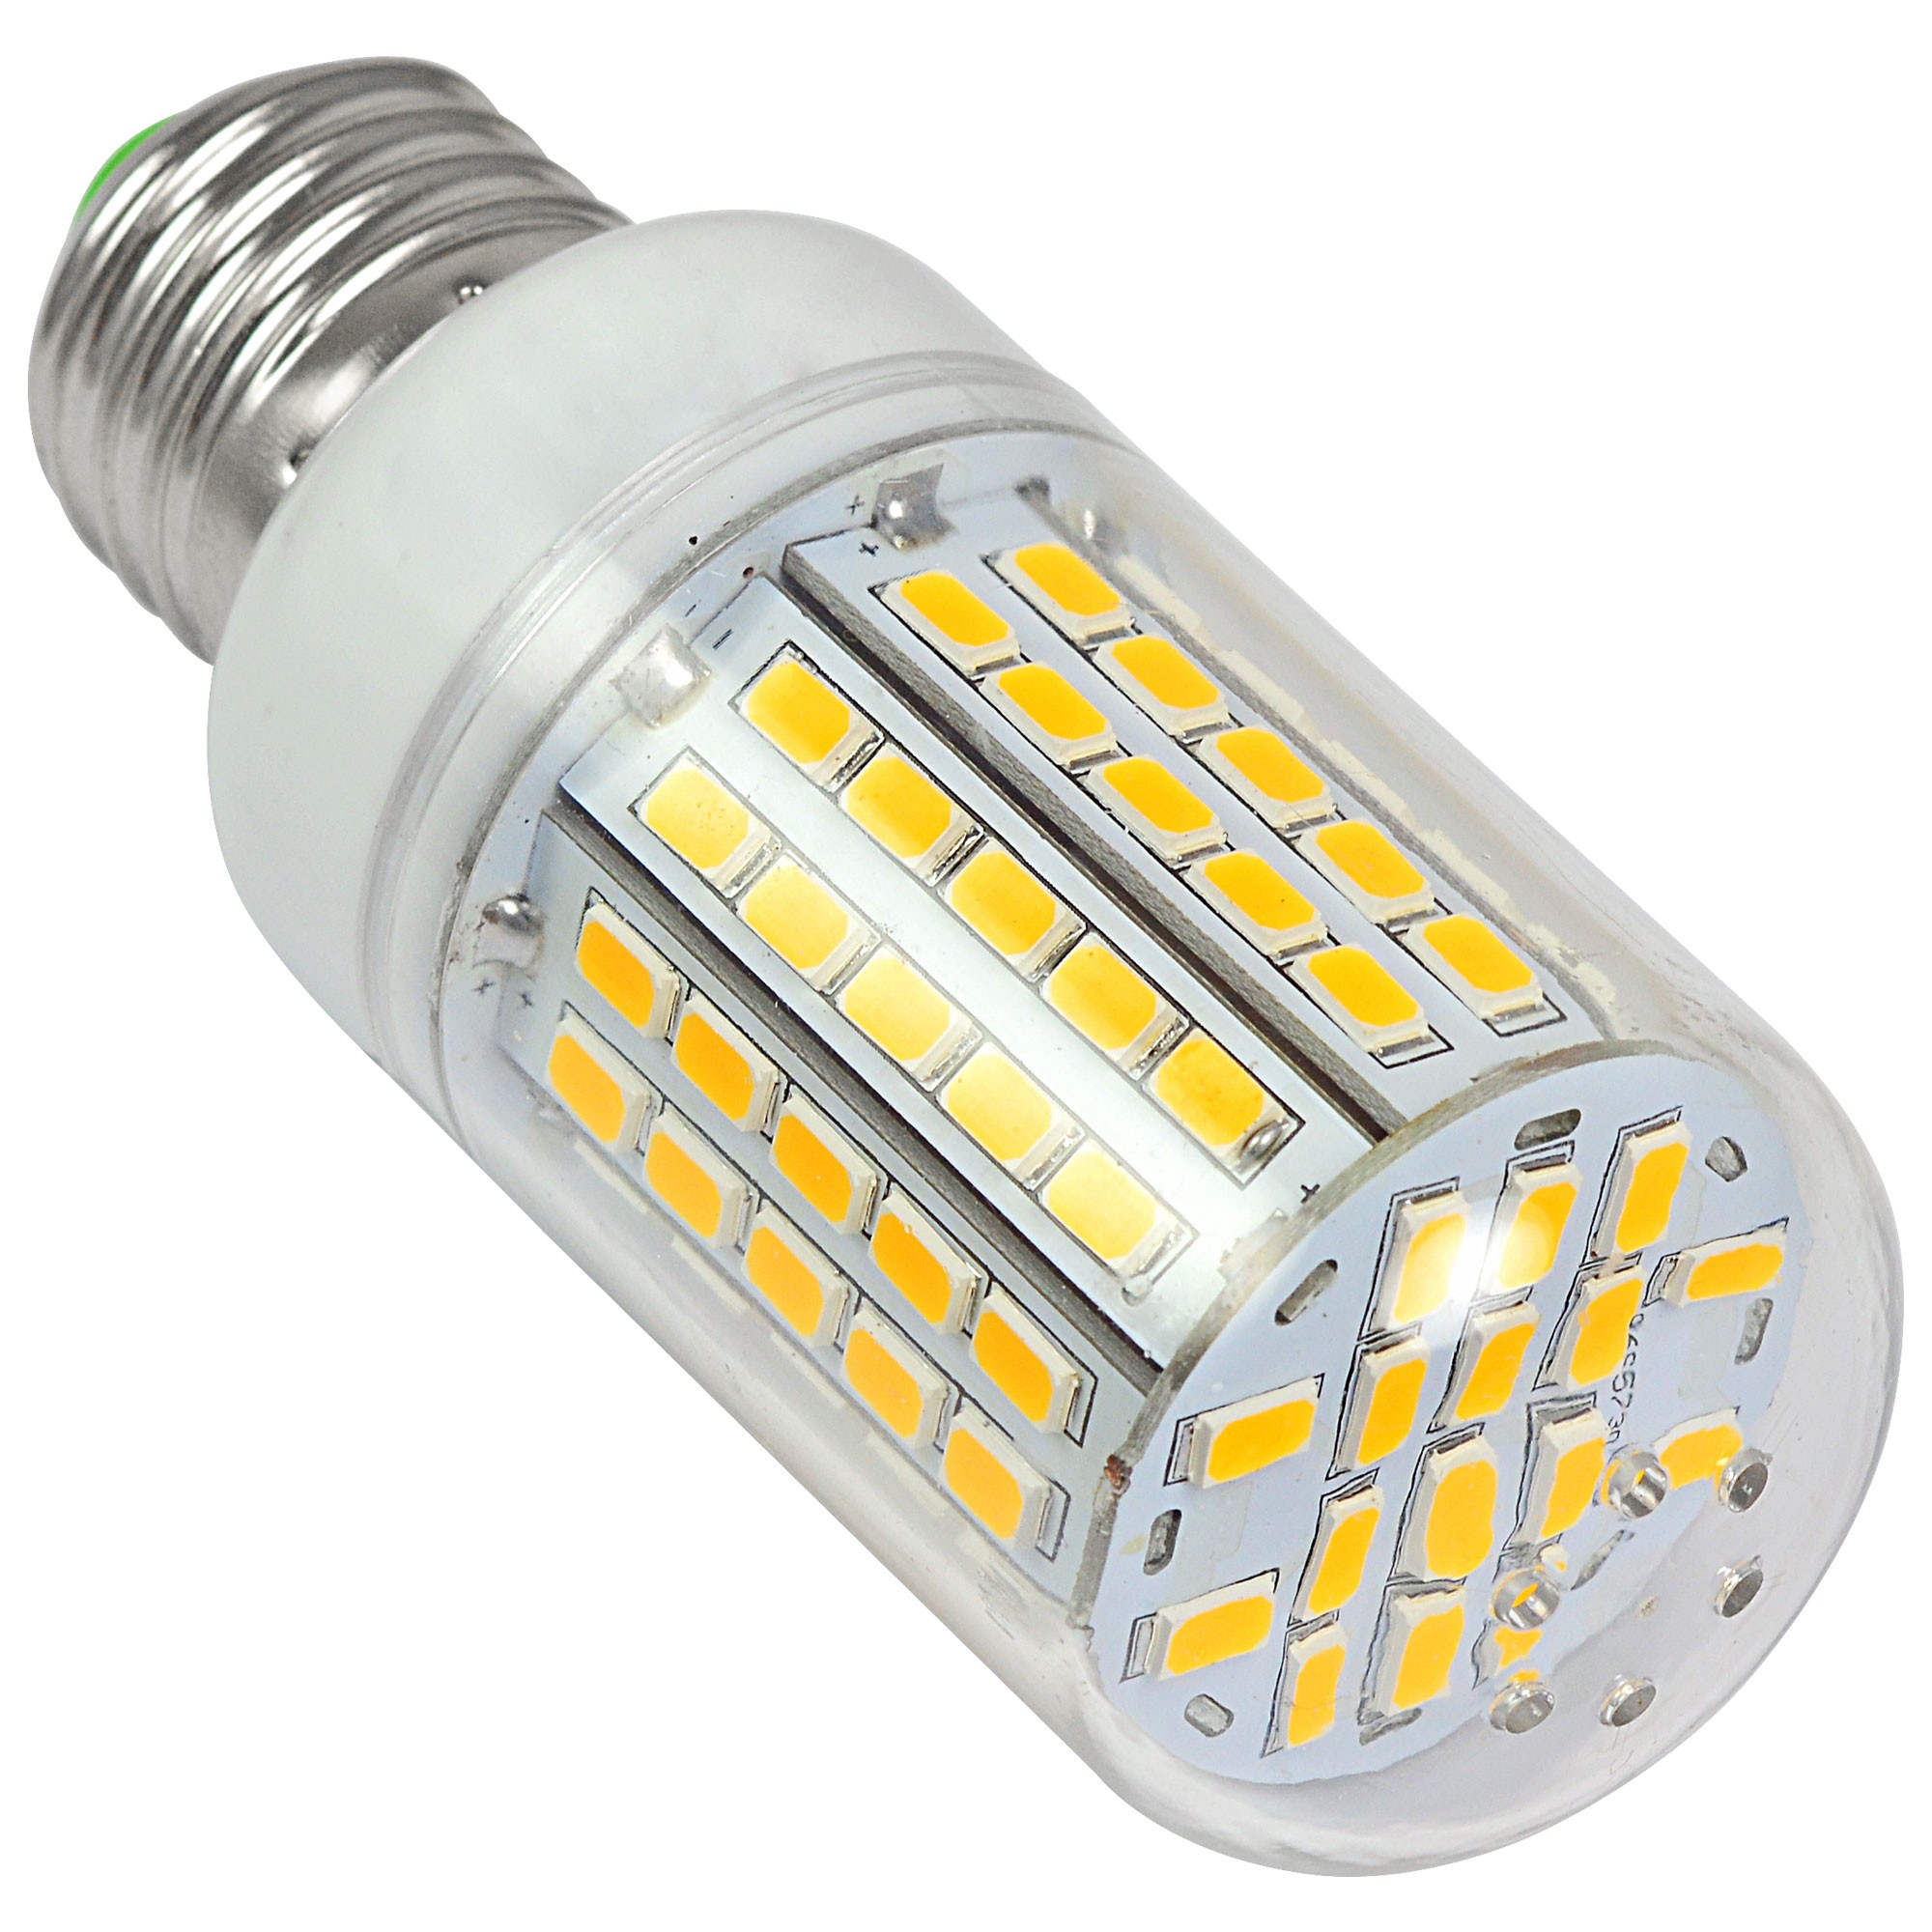 List 91+ Pictures Picture Of Led Light Bulb Updated